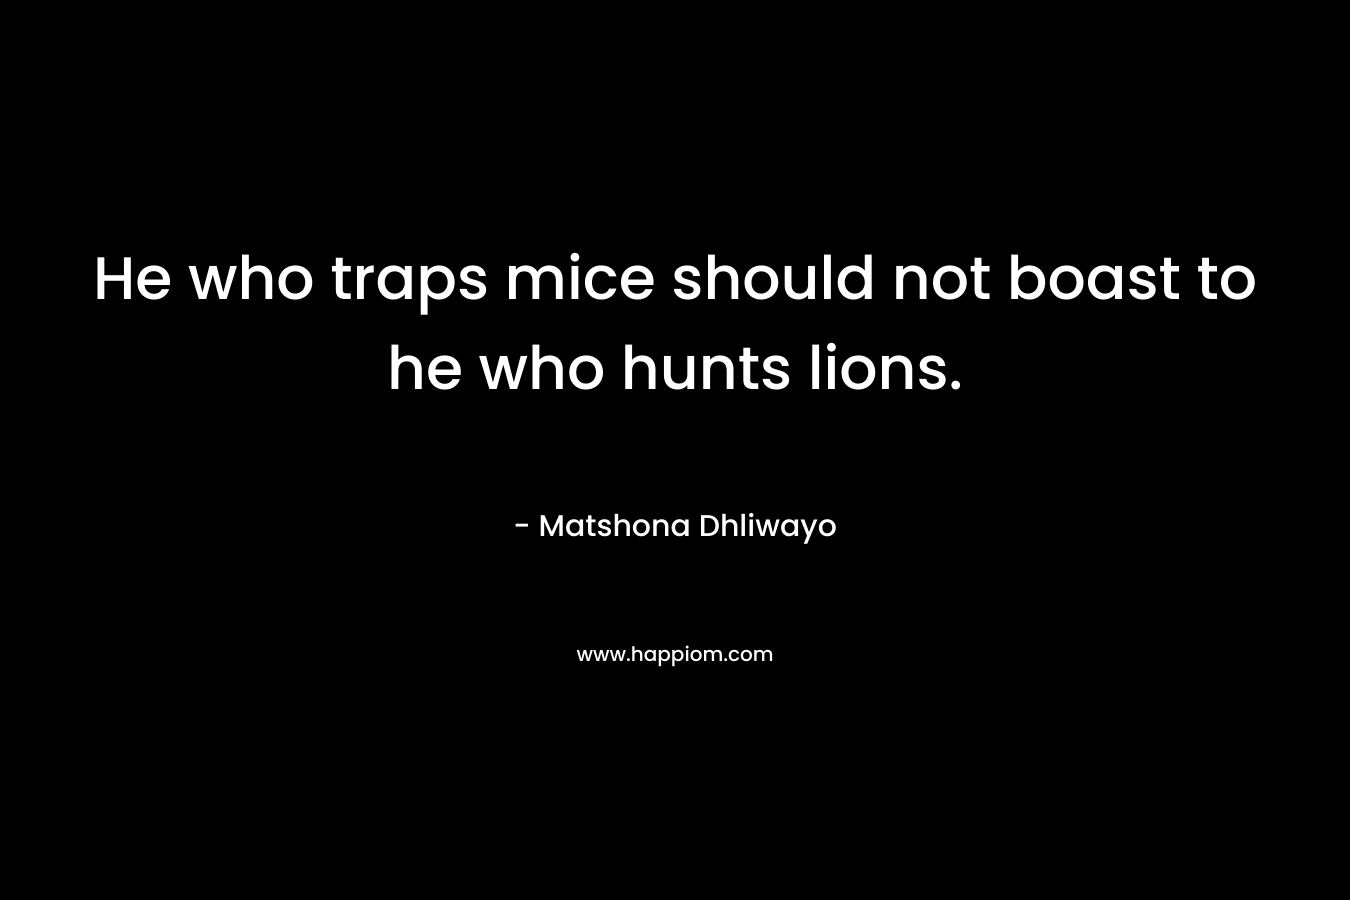 He who traps mice should not boast to he who hunts lions.